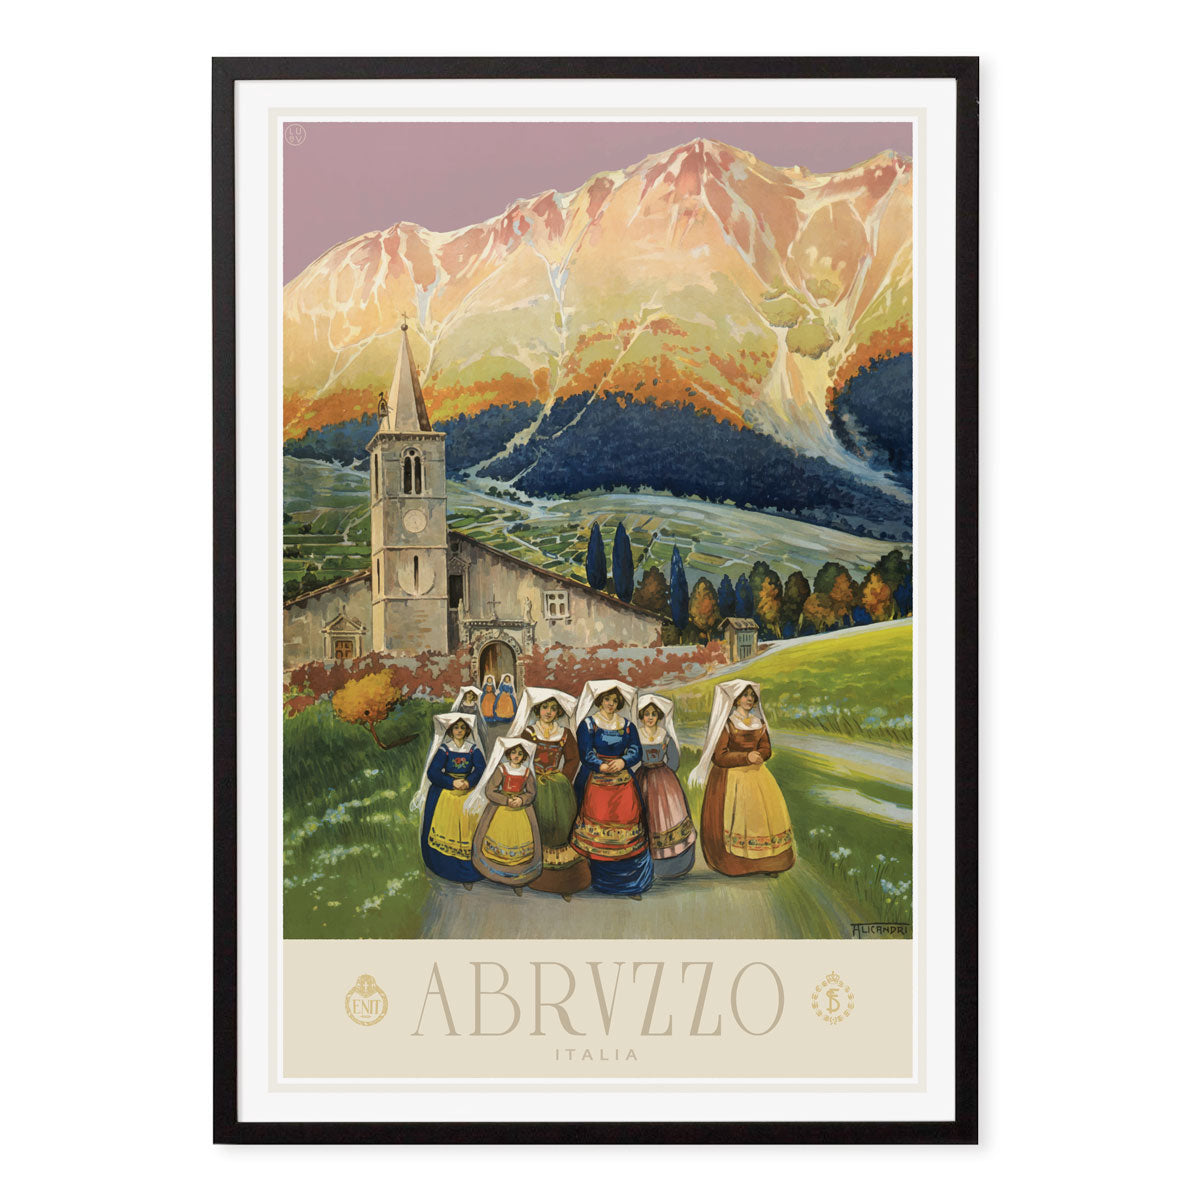 Abrvzzo Italy retro vintage poster print in black frame from Places We Luv